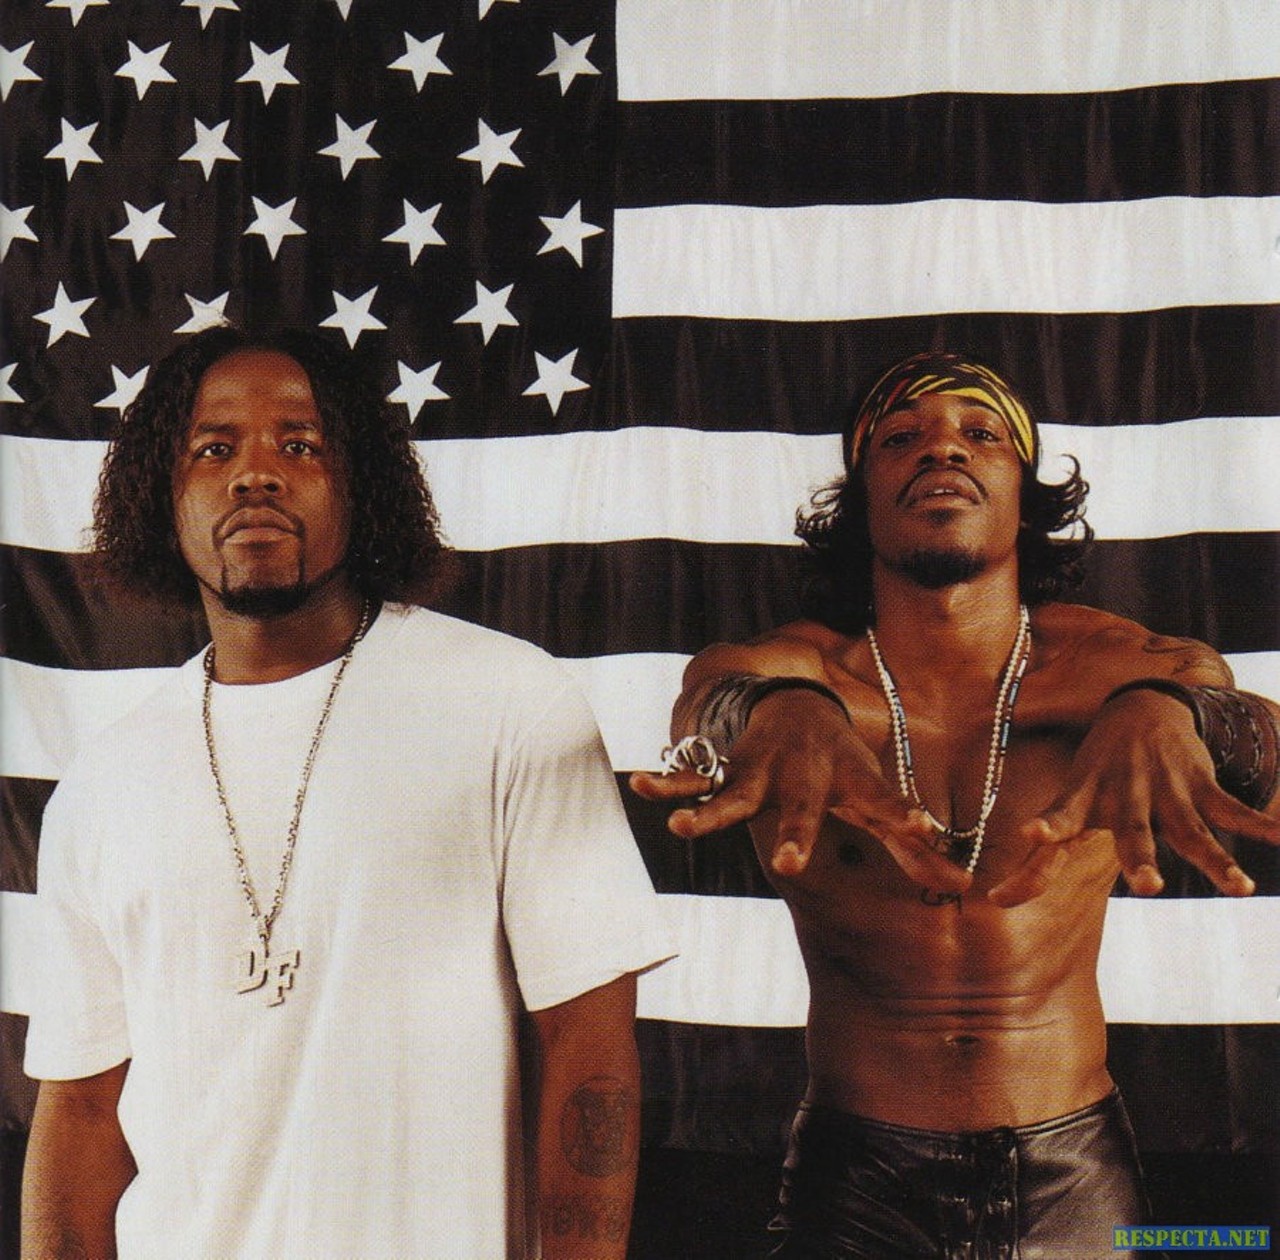 Outkast - Stankonia (2000)
The fourth album by Atlanta's Outkast, released in 2000. By 2011, Andre 3000 and Big Boi might be more famous for their solo work, but this record should take America back to a time and place. This album is full of hits like "So Fresh, So Clean," "Ms. Jackson" and "B.O.B."